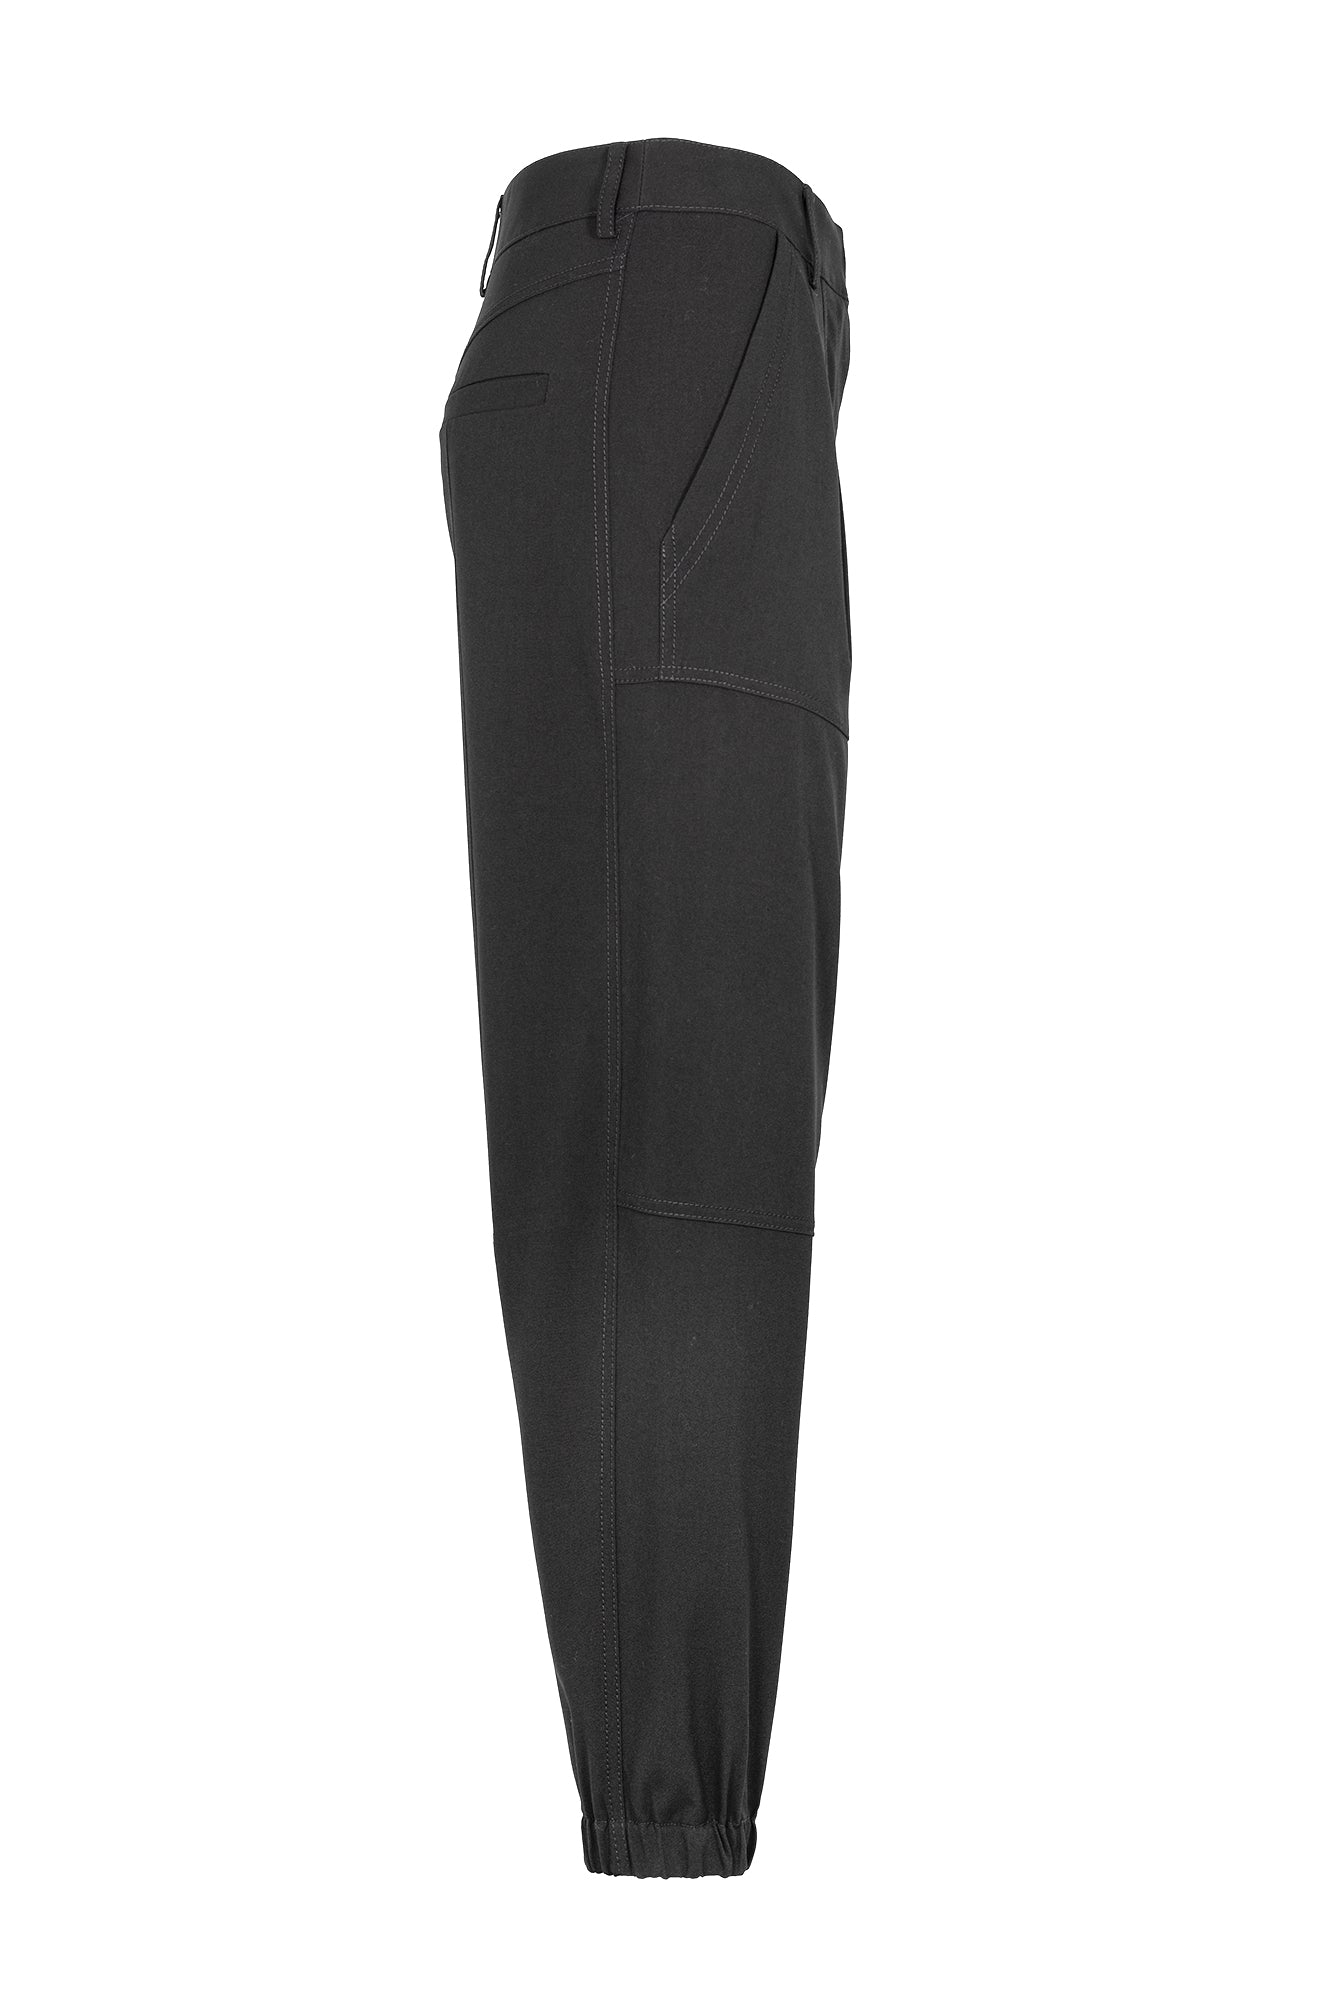 Black cargo trousers with cuff at hem